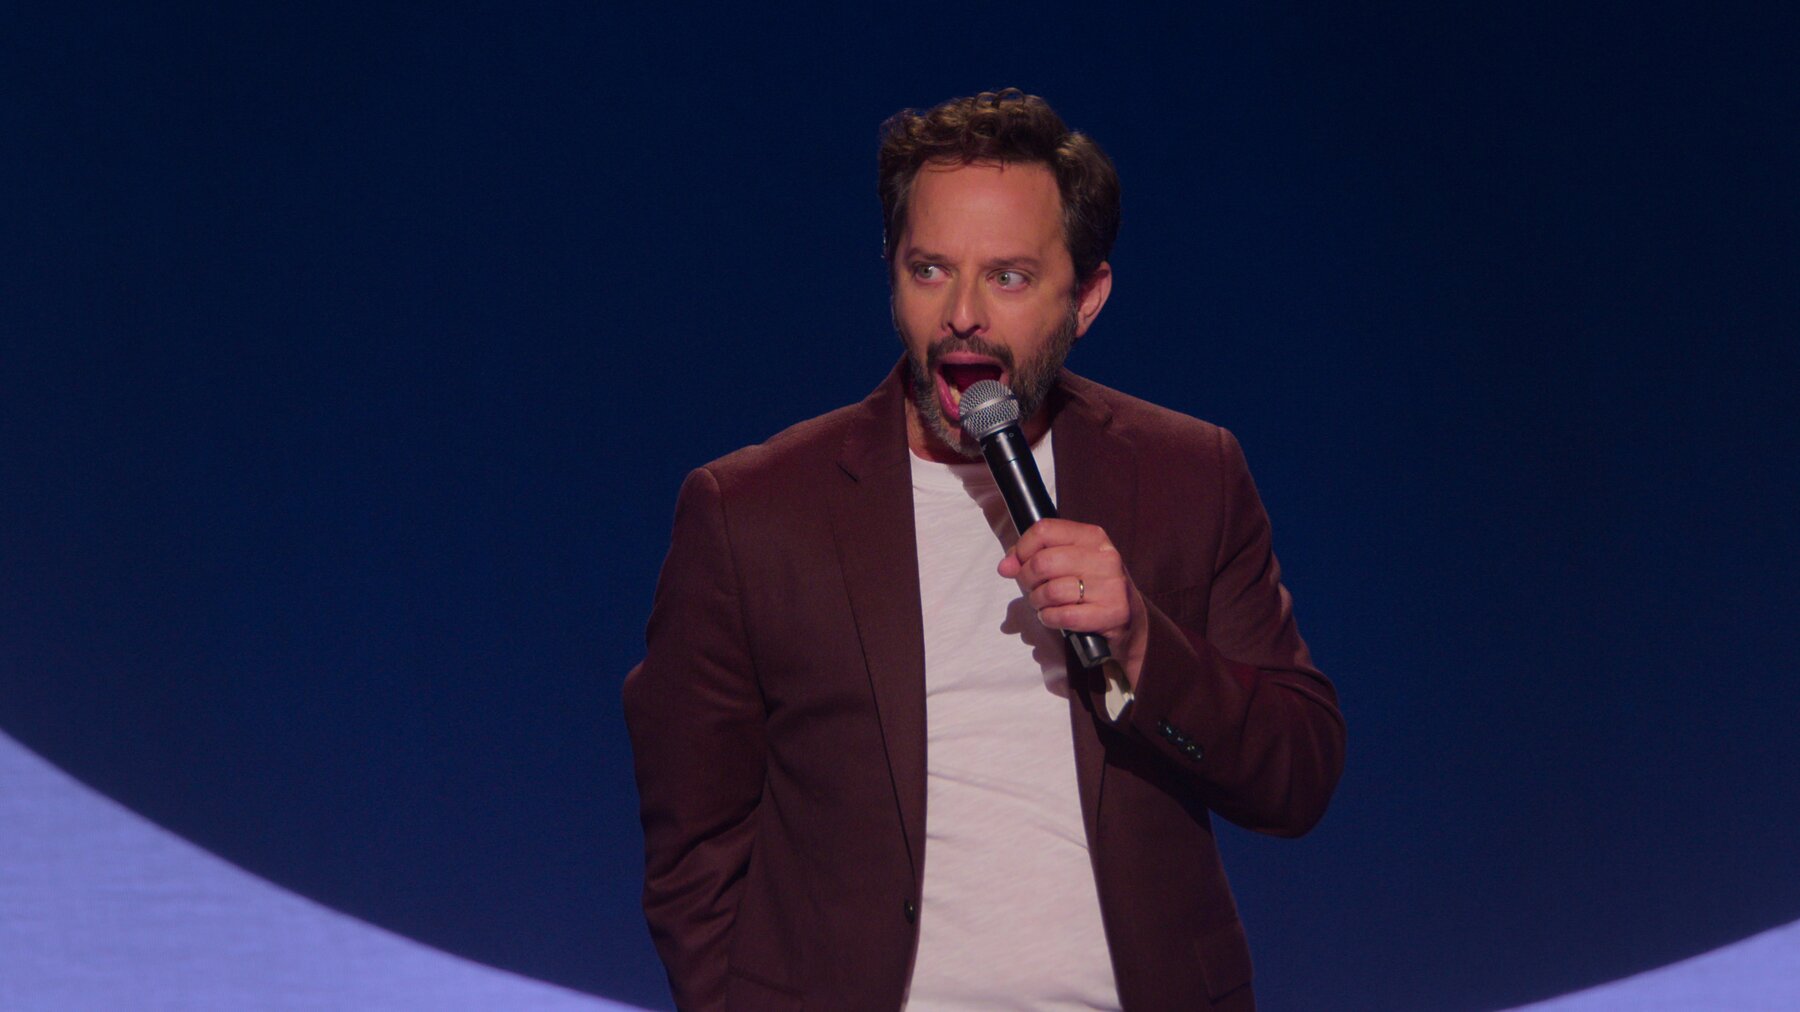 Three new Netflix releases today include a Nick Kroll comedy Special